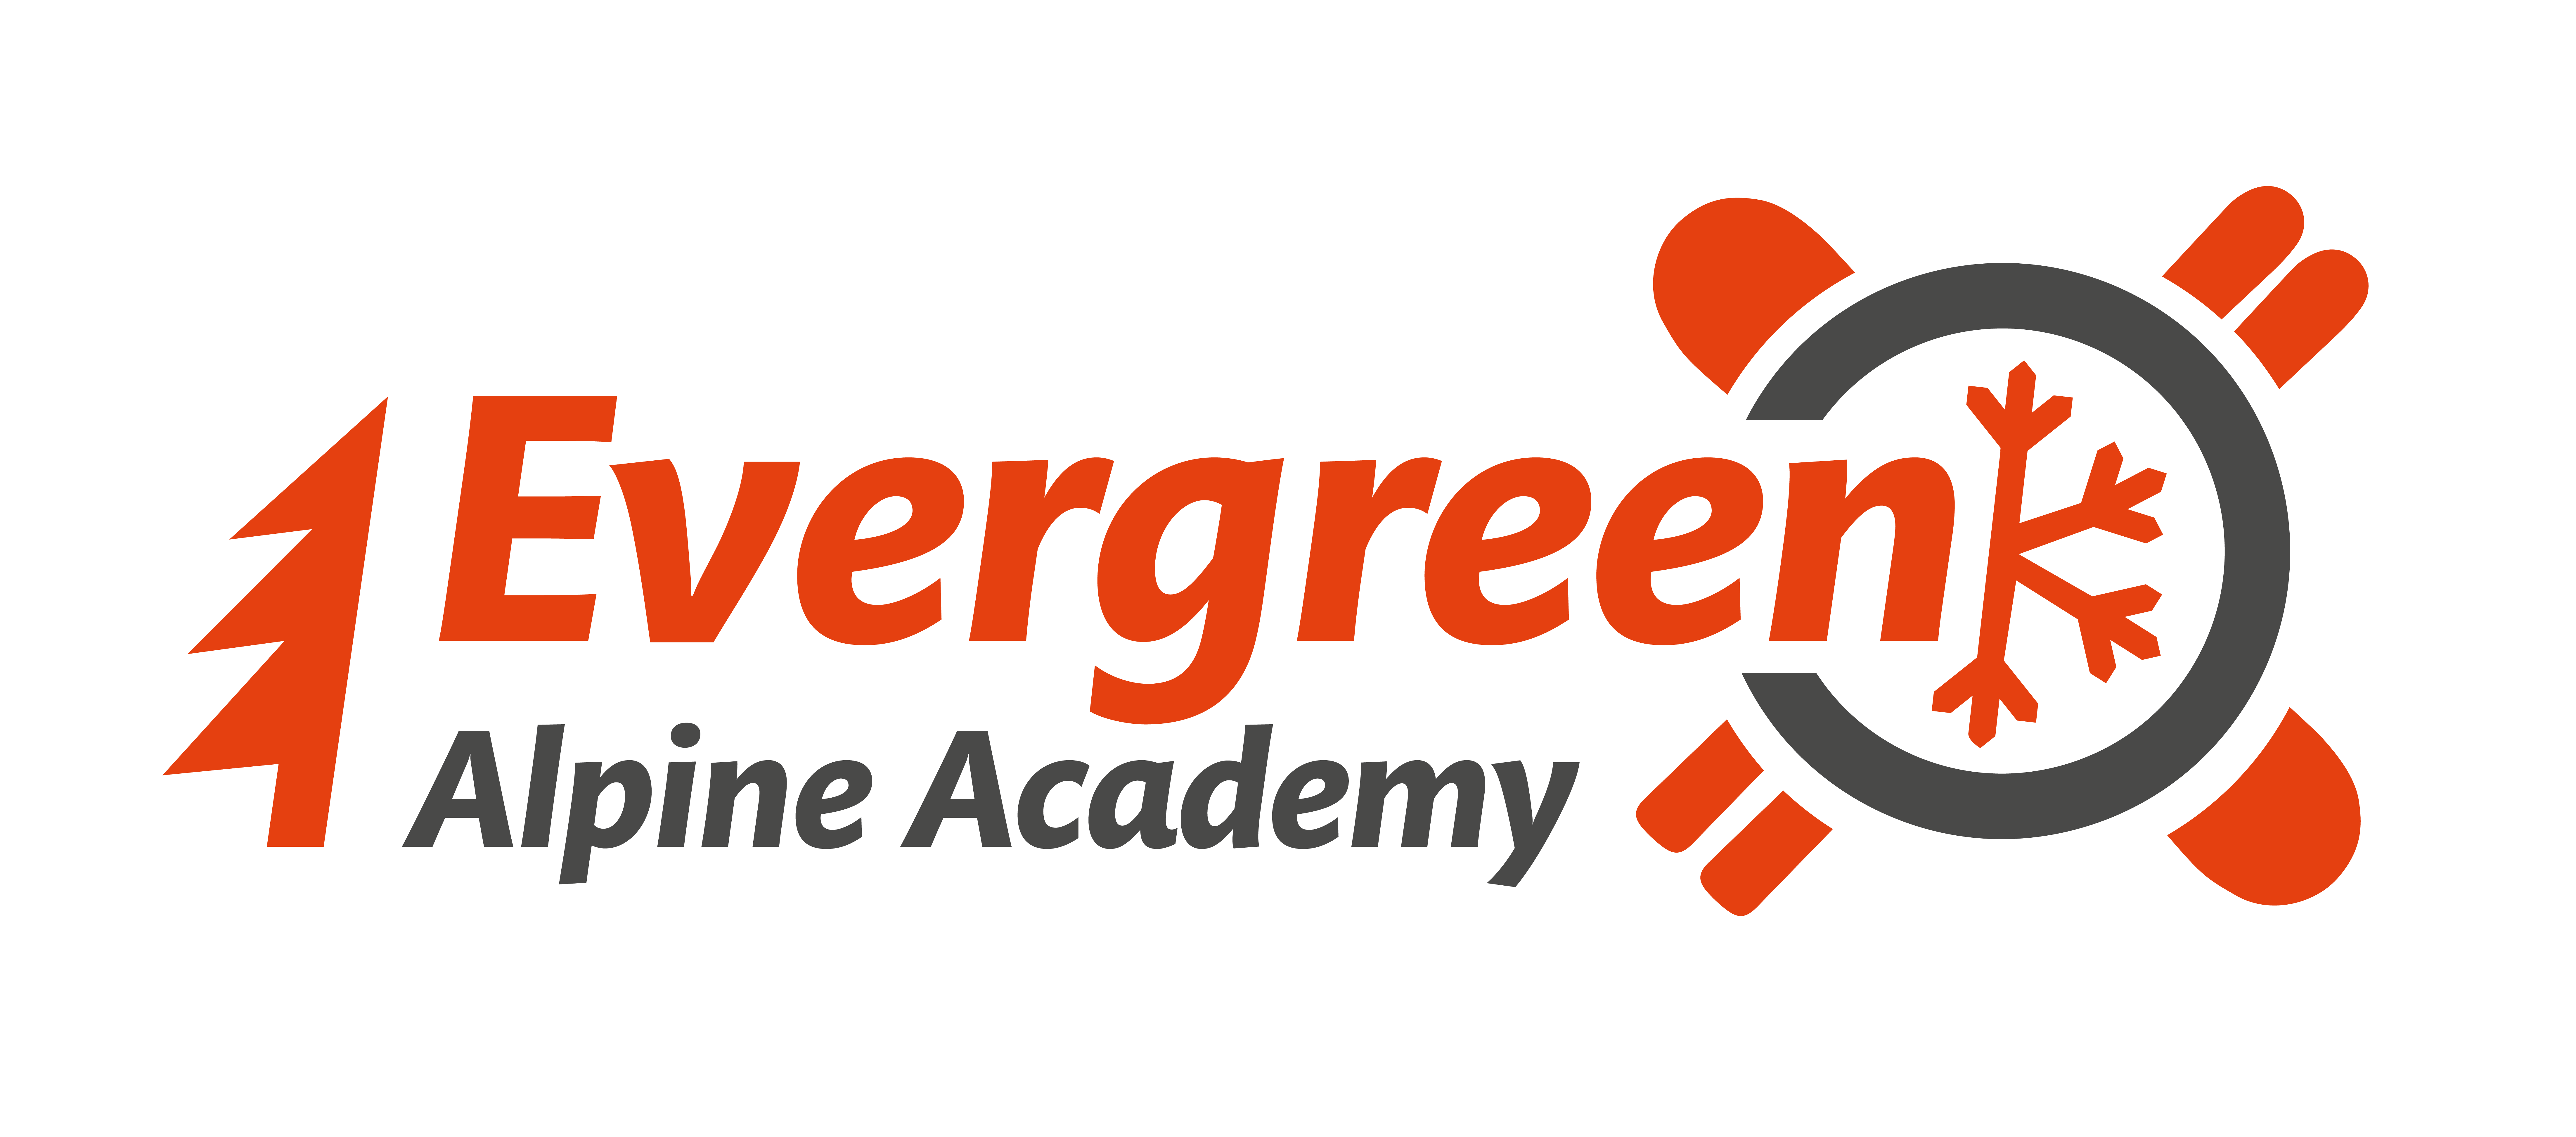 TOBE is proud to partner with Evergreen Alpine Academy